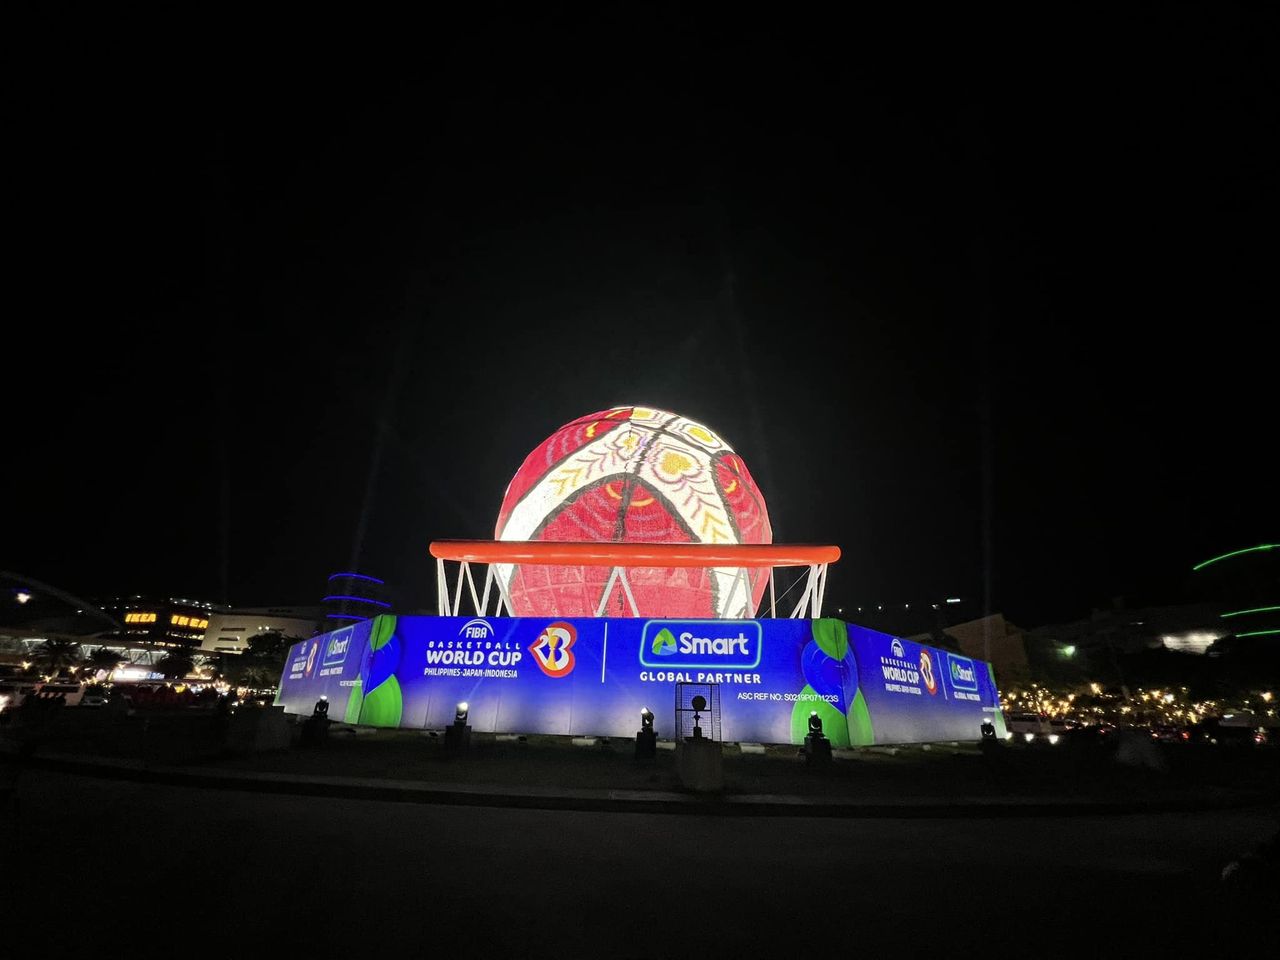 Smart transformed the Mall of Asia Ball into a giant basketball to celebrate the 2023 FIBA World Cup